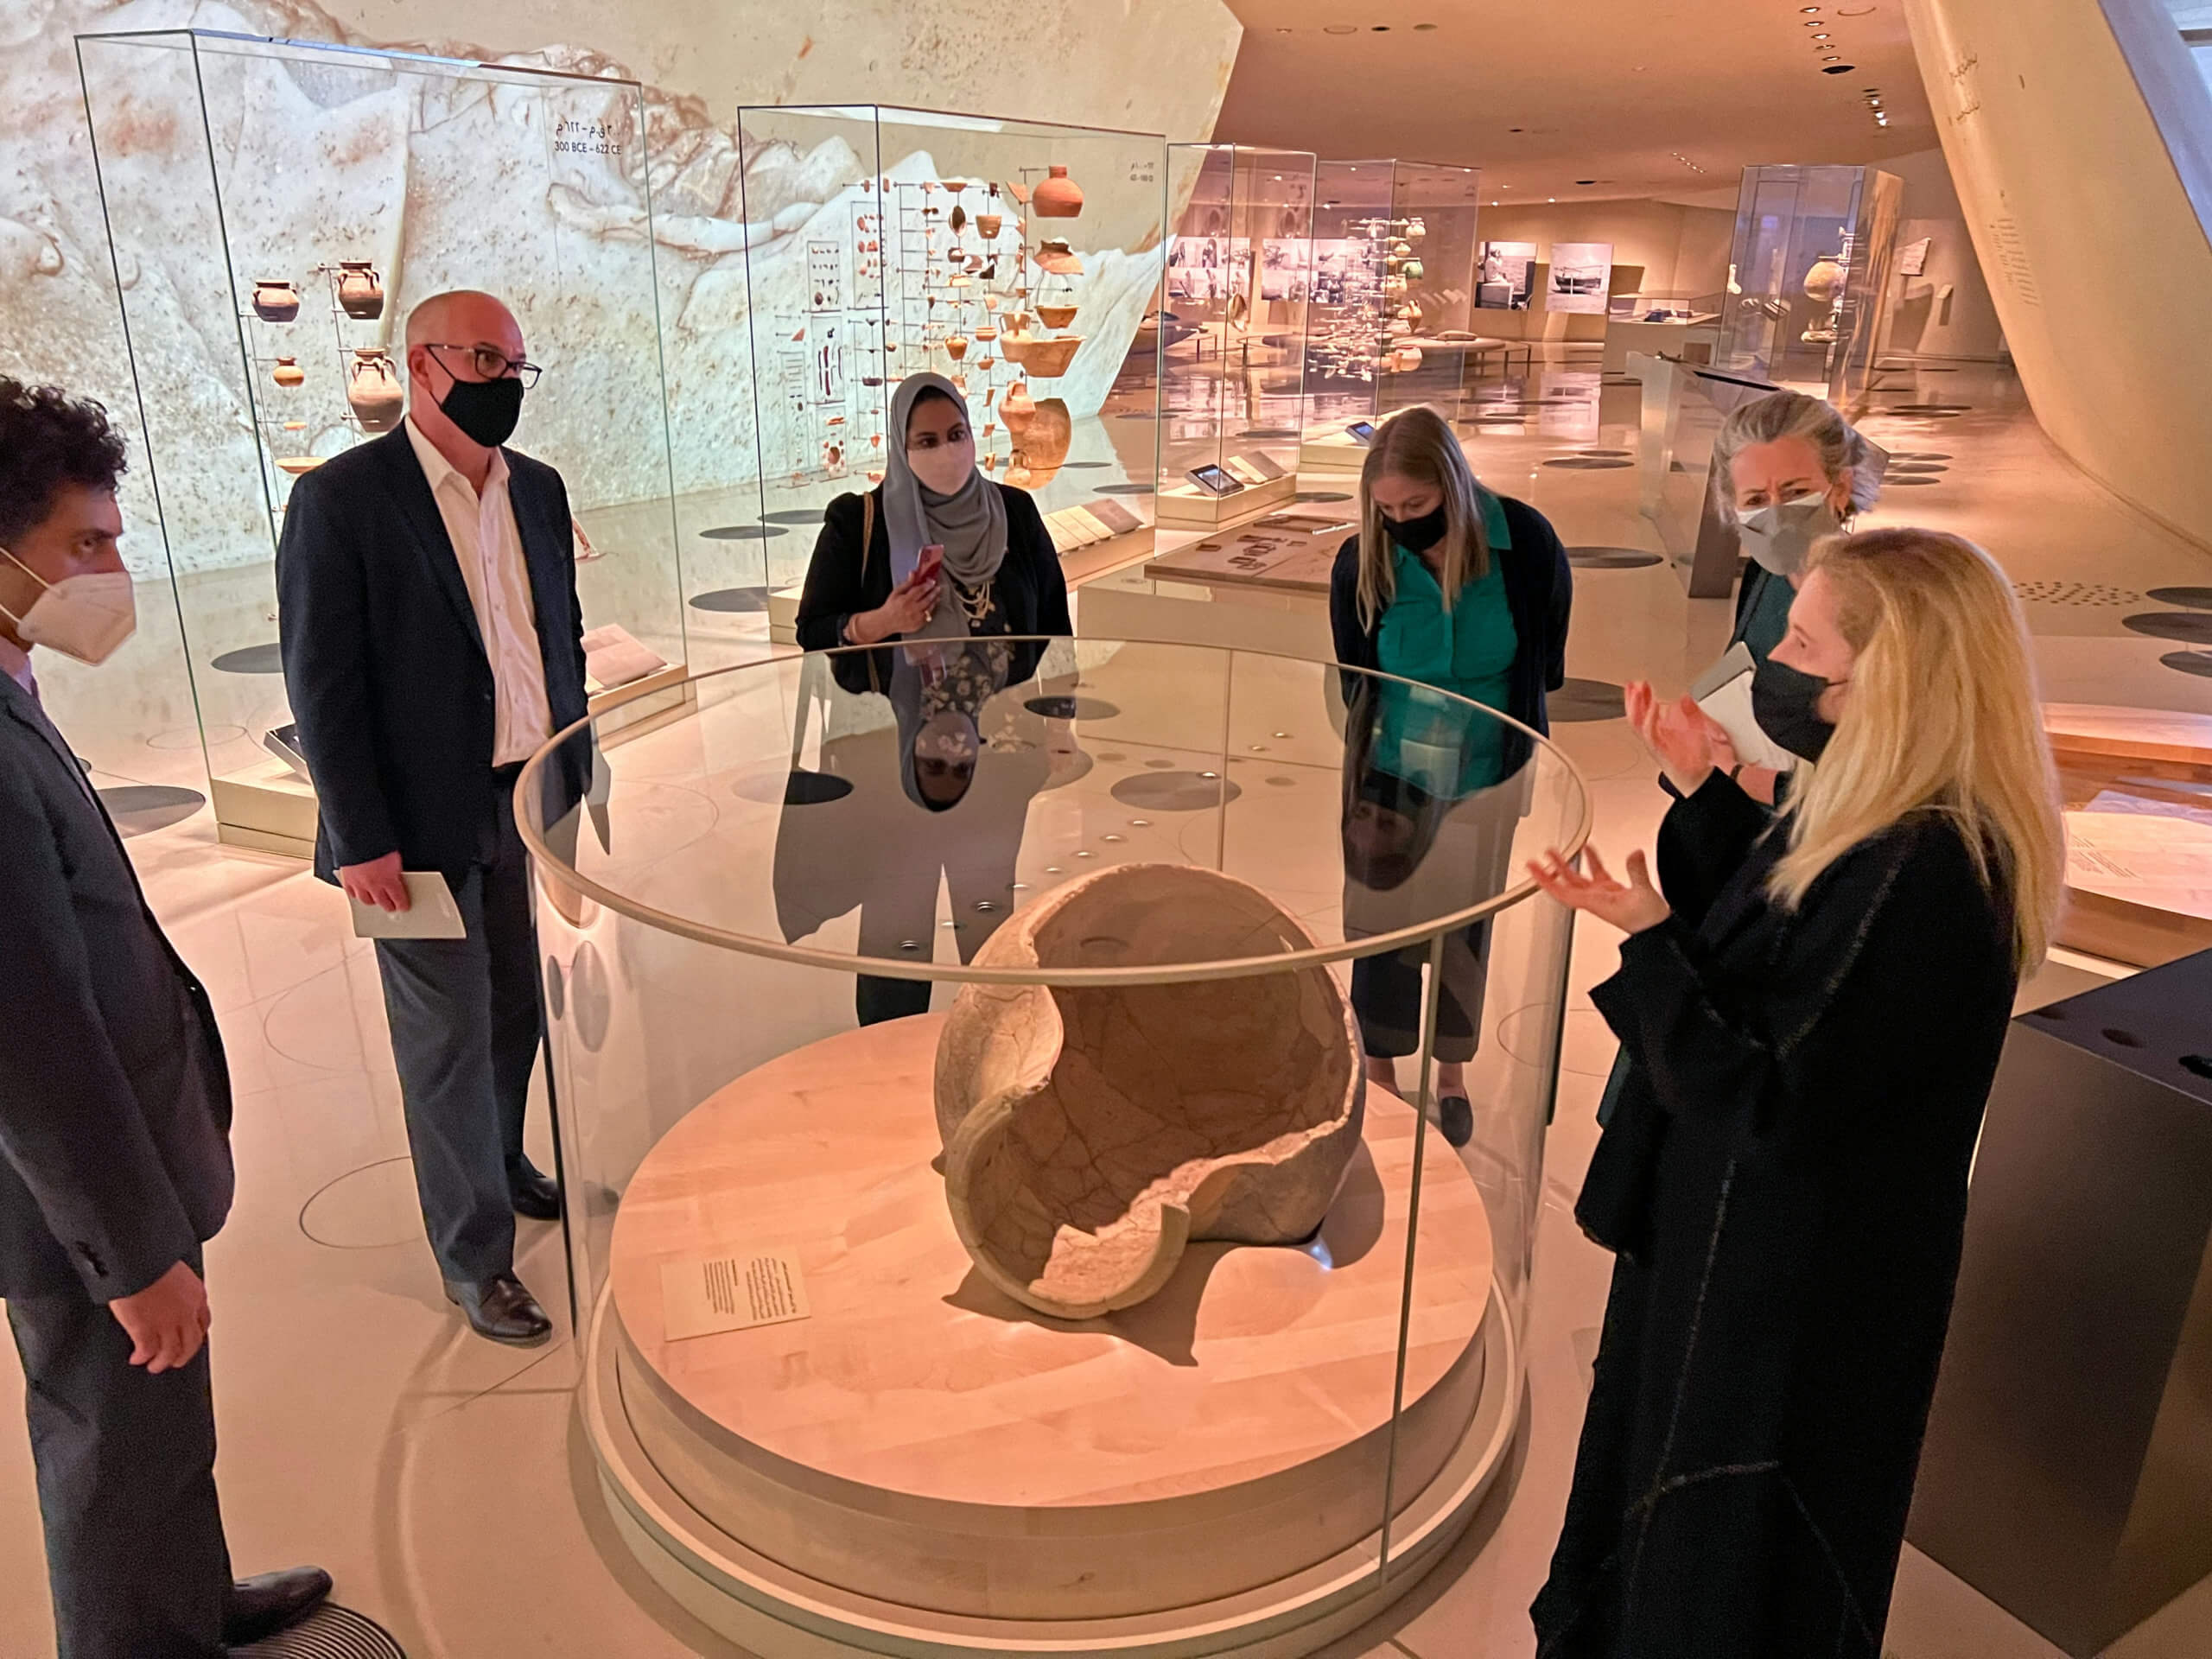 The delegates learning about the rich history and traditions of Qatar at the National Museum of Qatar